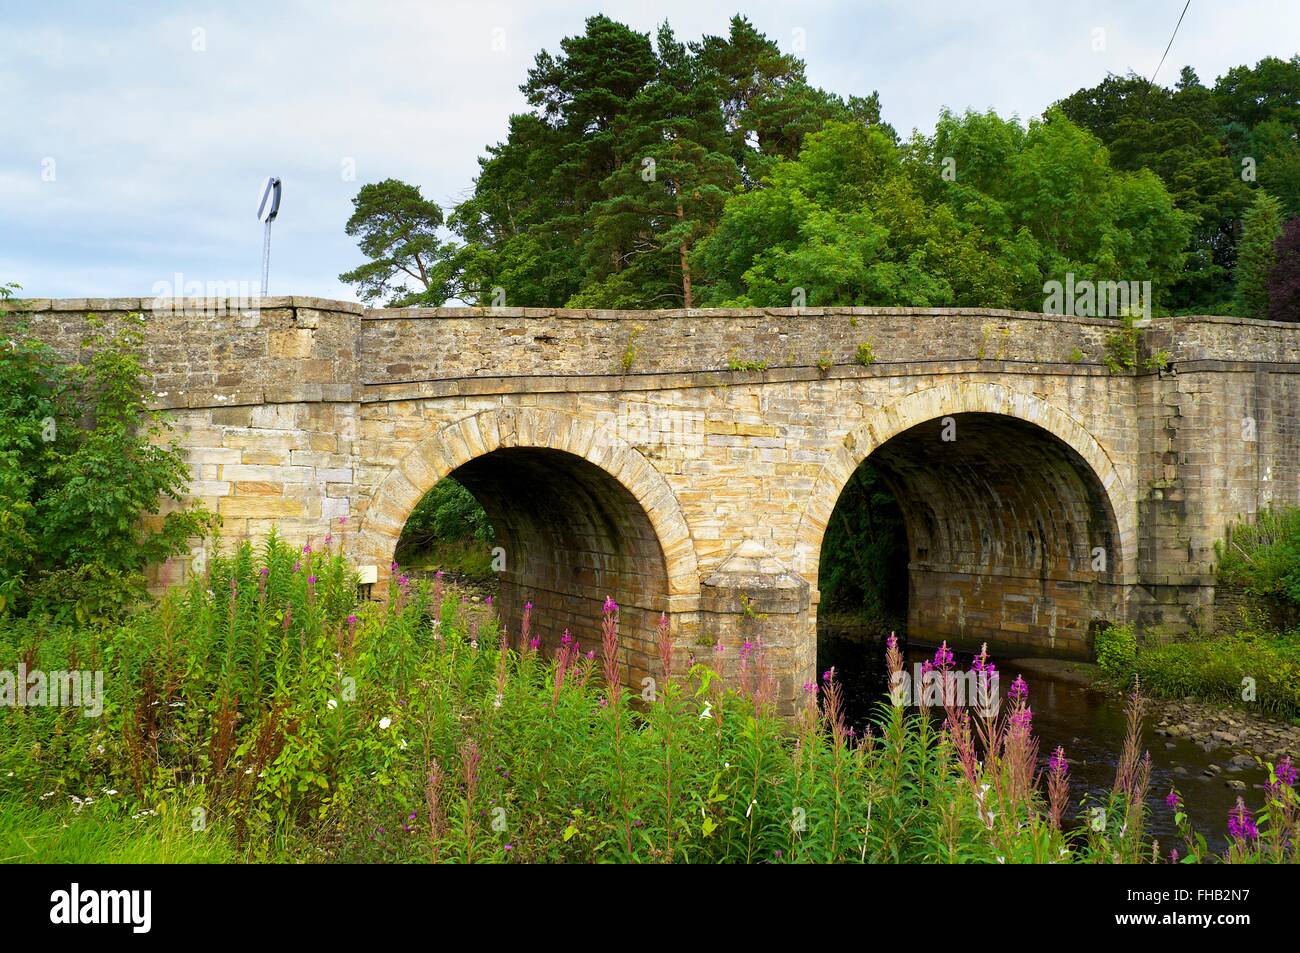 Bridge at Blanchland, Derwent Valley, North Pennines Area of Outstanding Natural Beauty, Northumberland, England, United Kingdom Stock Photo